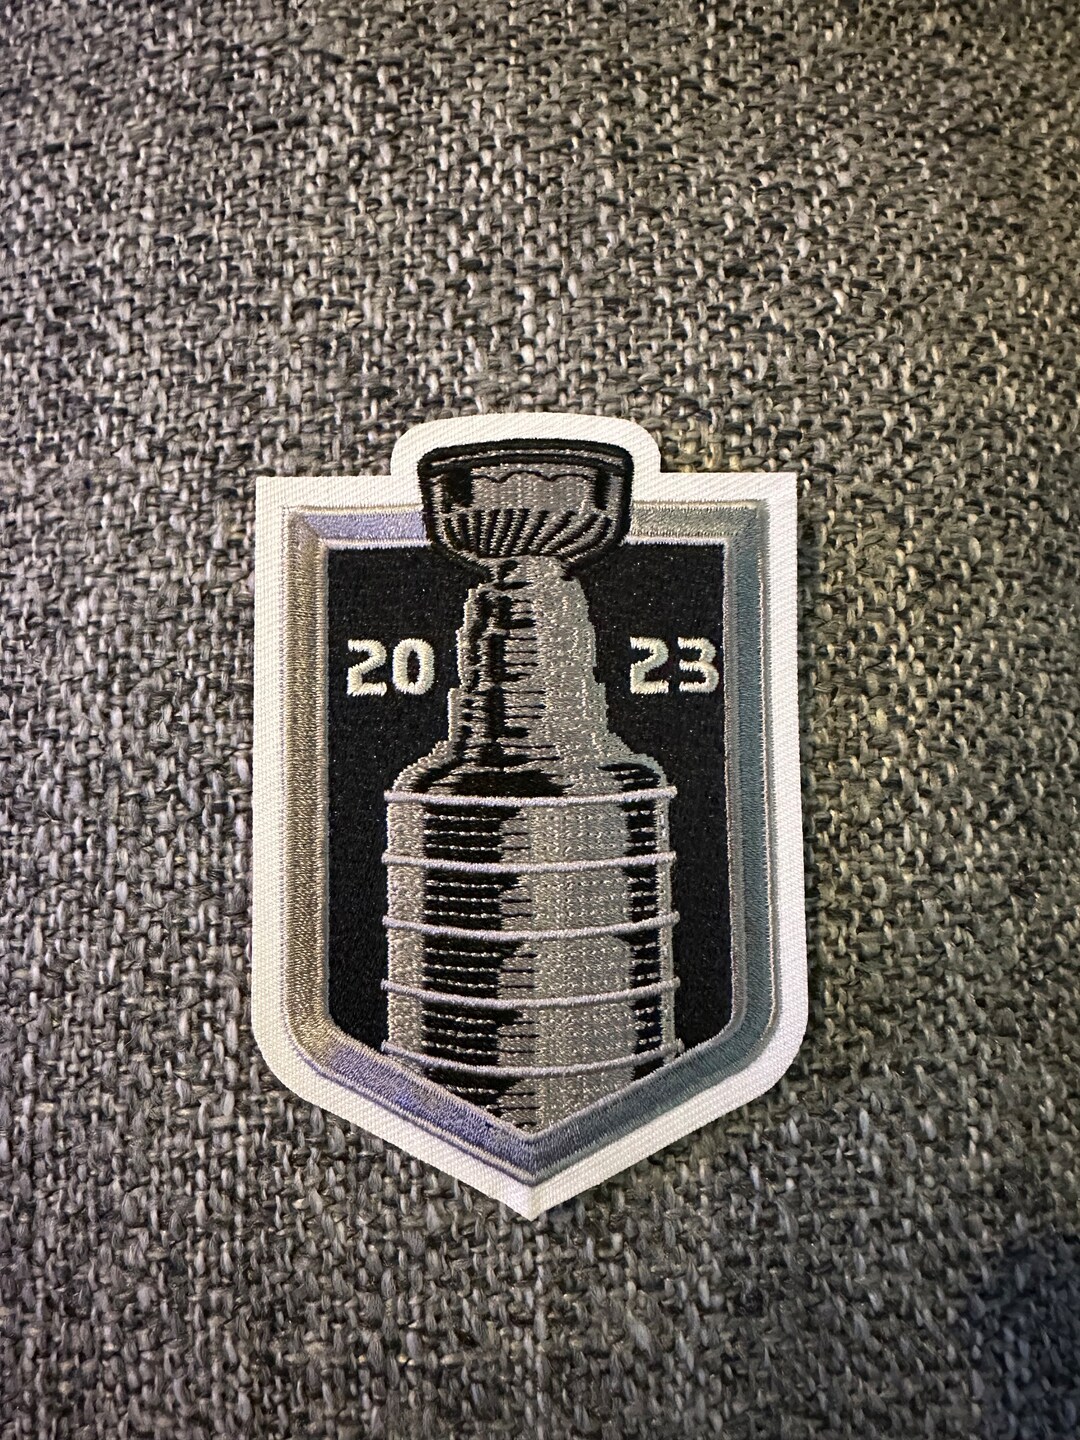 2023 Stanley Cup Patch Etsy